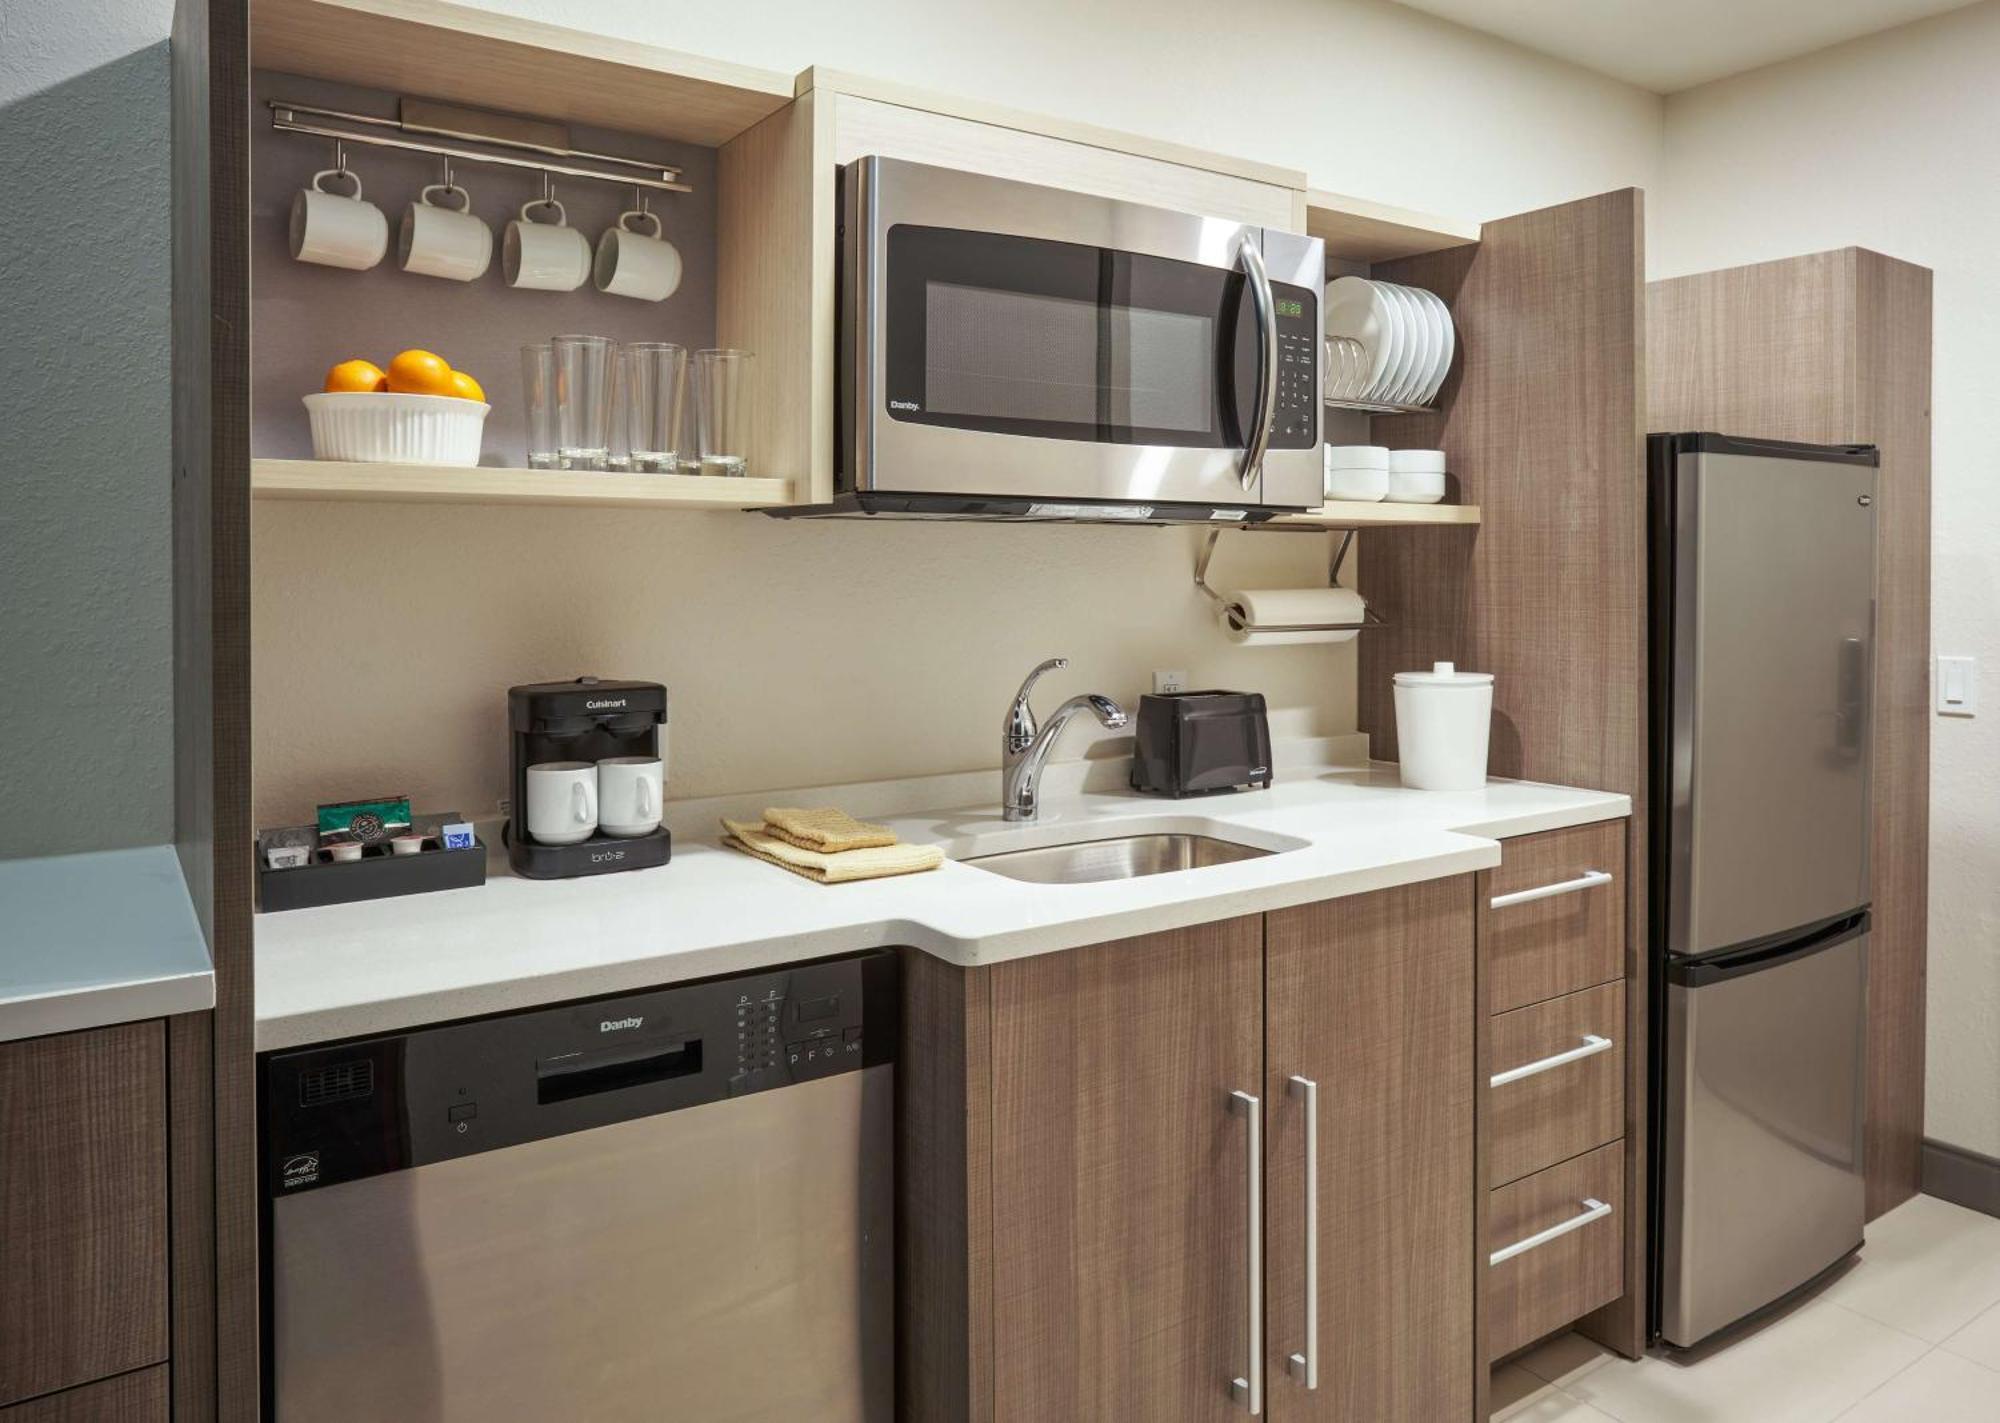 Home2 Suites By Hilton Ft. Lauderdale Downtown, Fl 포트 로더데일 외부 사진